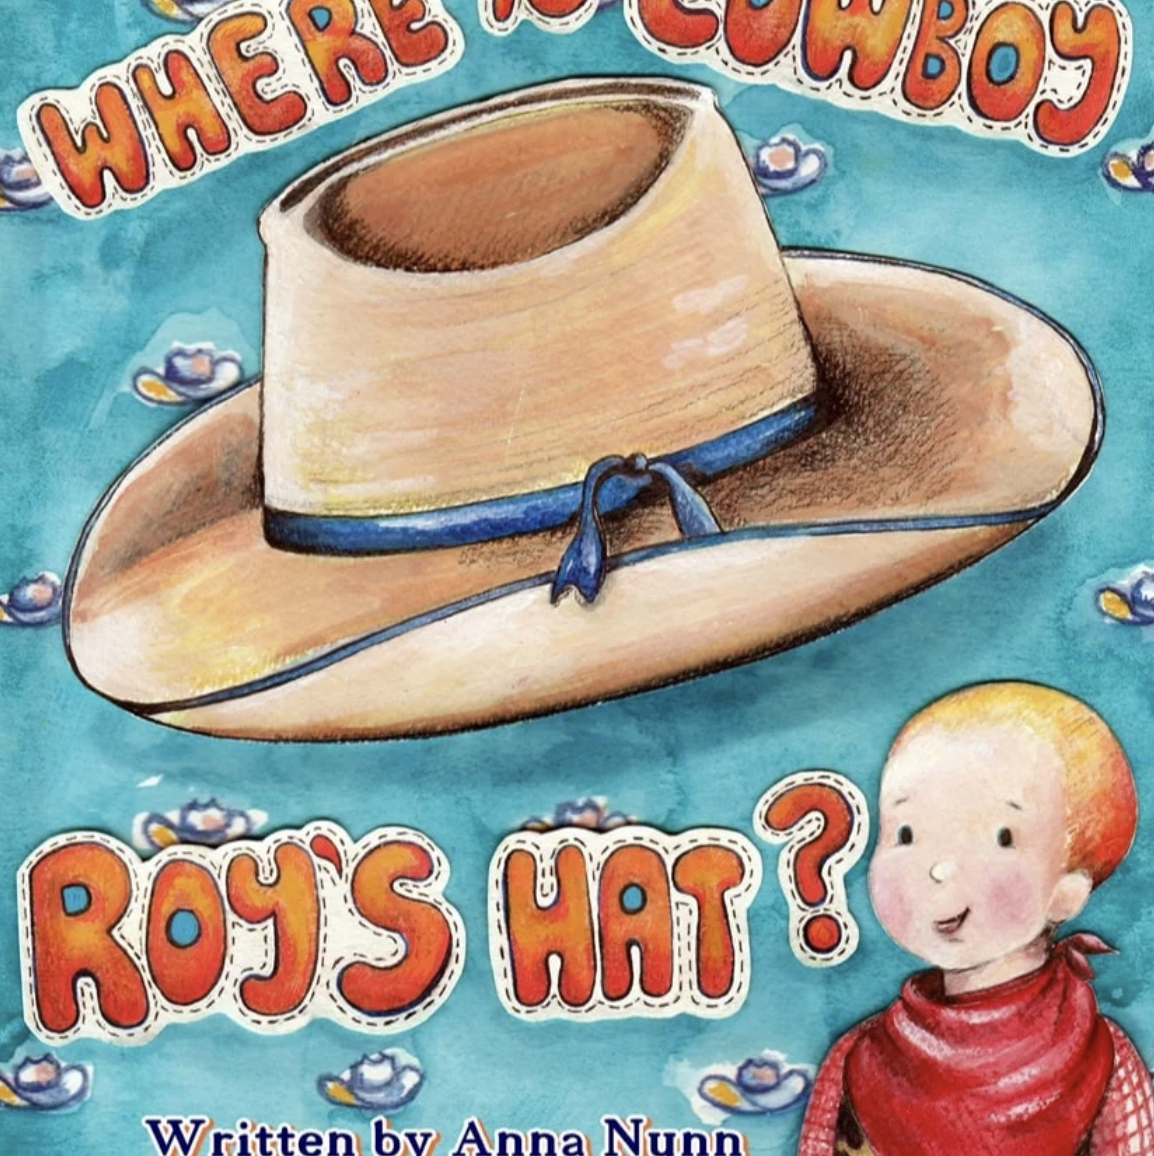 Where are Cowboy Roy’s Boots?